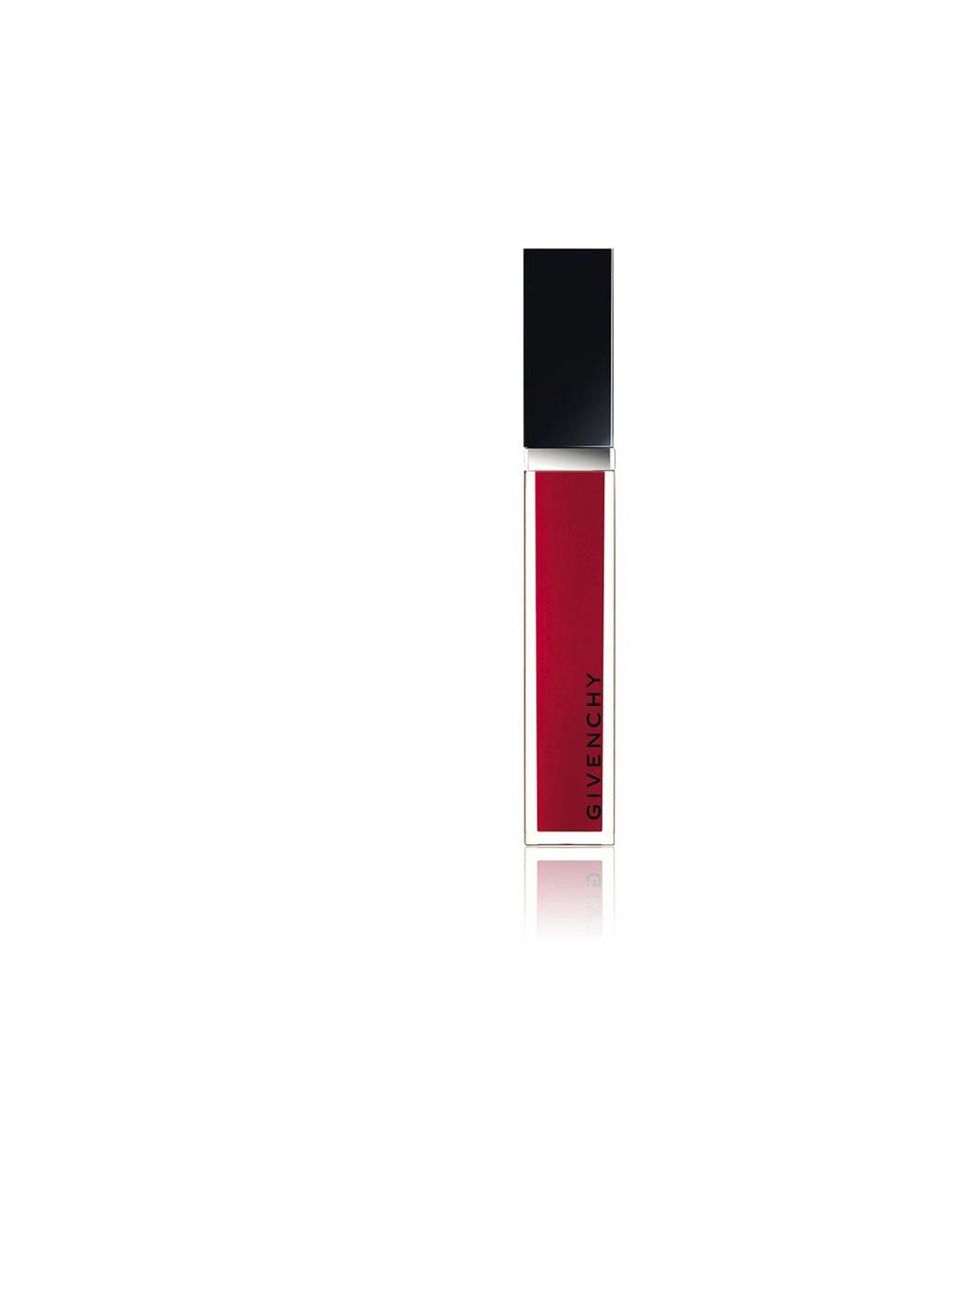 <p>Givenchy Gloss Interdit in Bucolic Poppy, £19, at <a href="http://www.harrods.com/product/givenchy/gloss-interdit-no-32-bucolic-poppy-6ml/000000000002767168?dept=az&amp;cat1=beauty-givenchy-beauty&amp;cat2=givenchy-beauty-cosmetics">harrods.com</a></p>